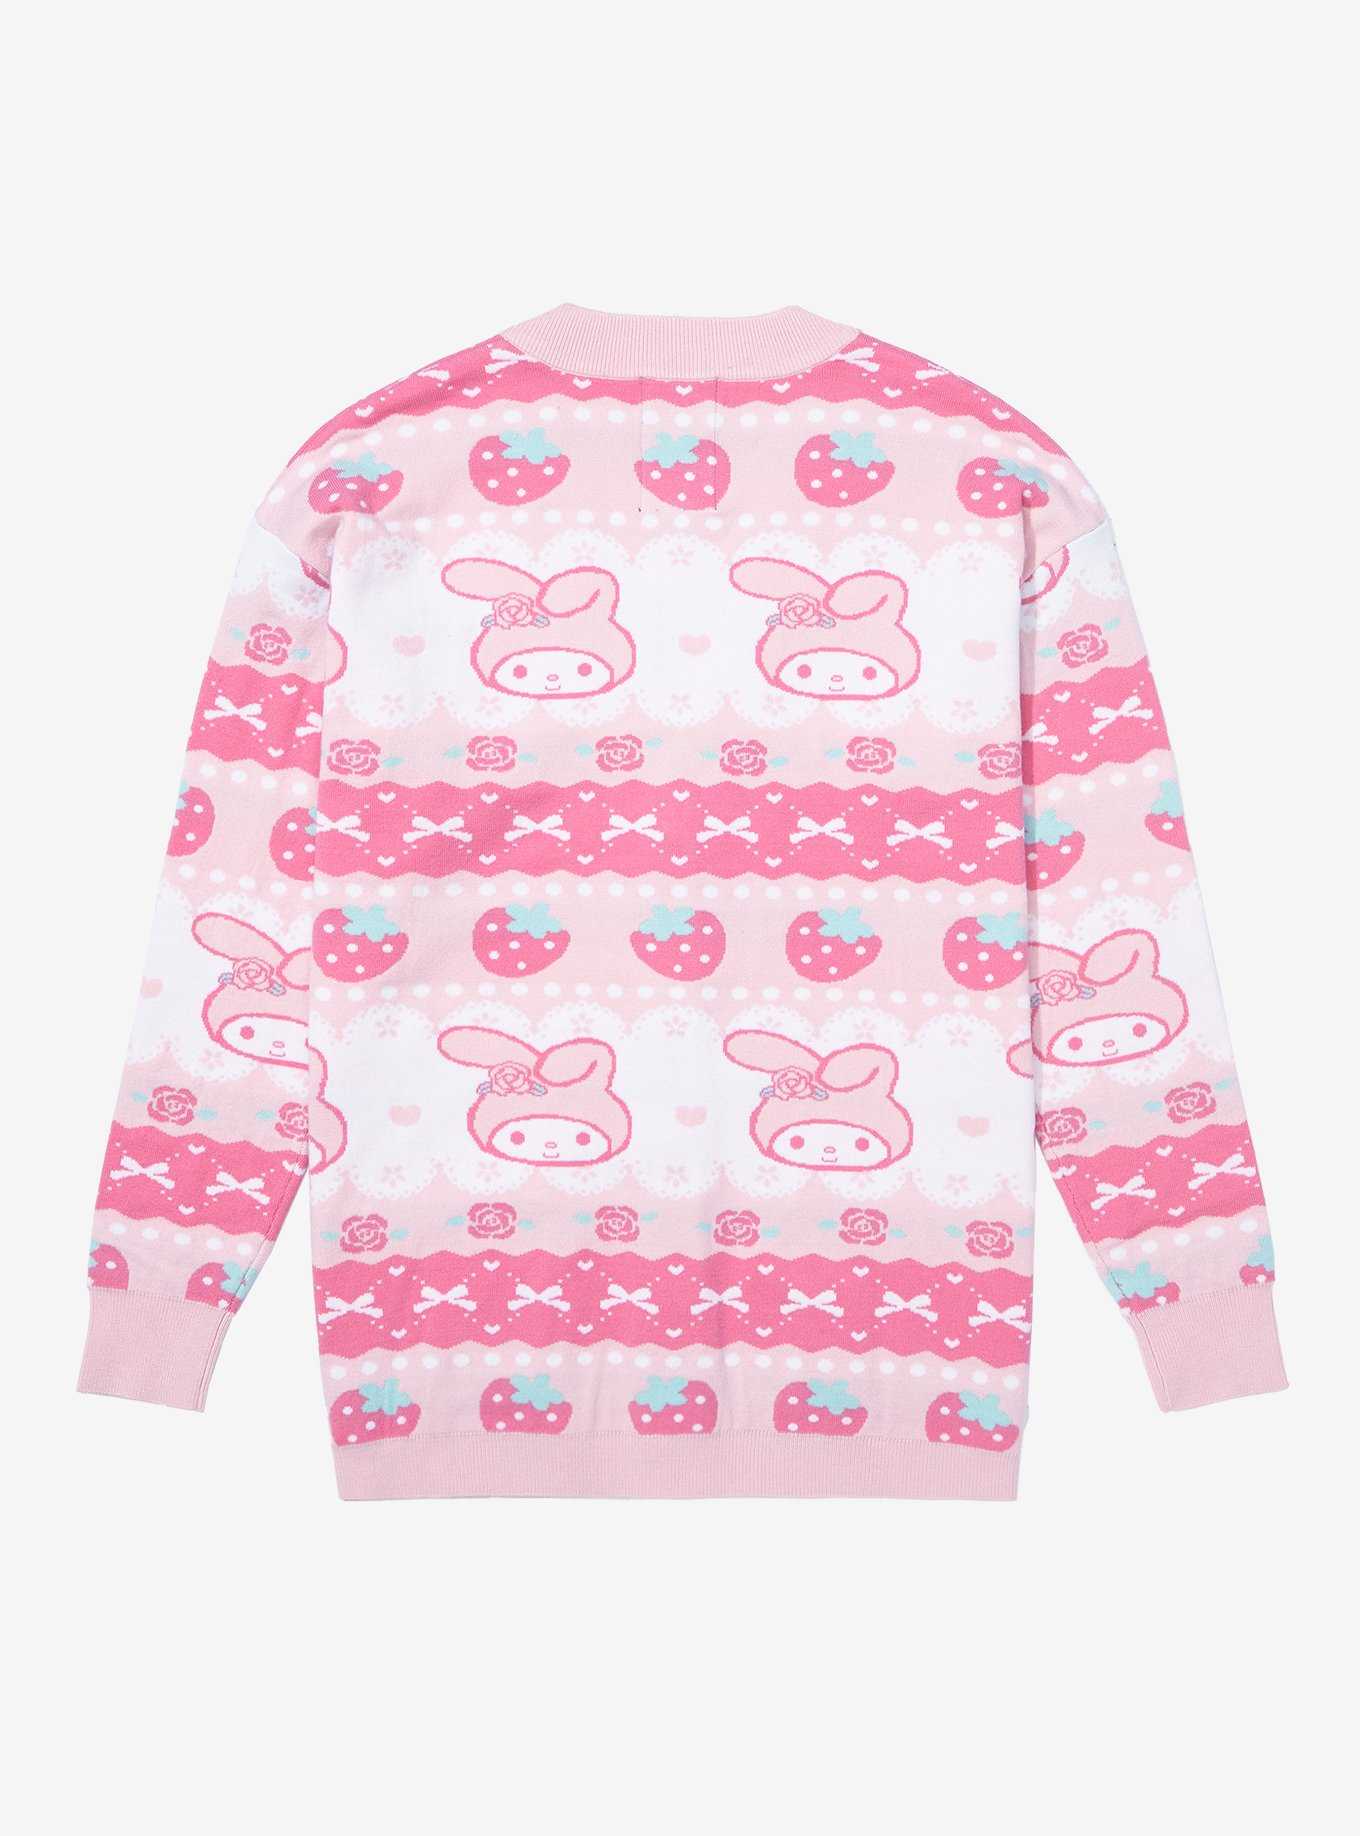 Sanrio My Melody Strawberry Patterned Cardigan - BoxLunch Exclusive, , hi-res